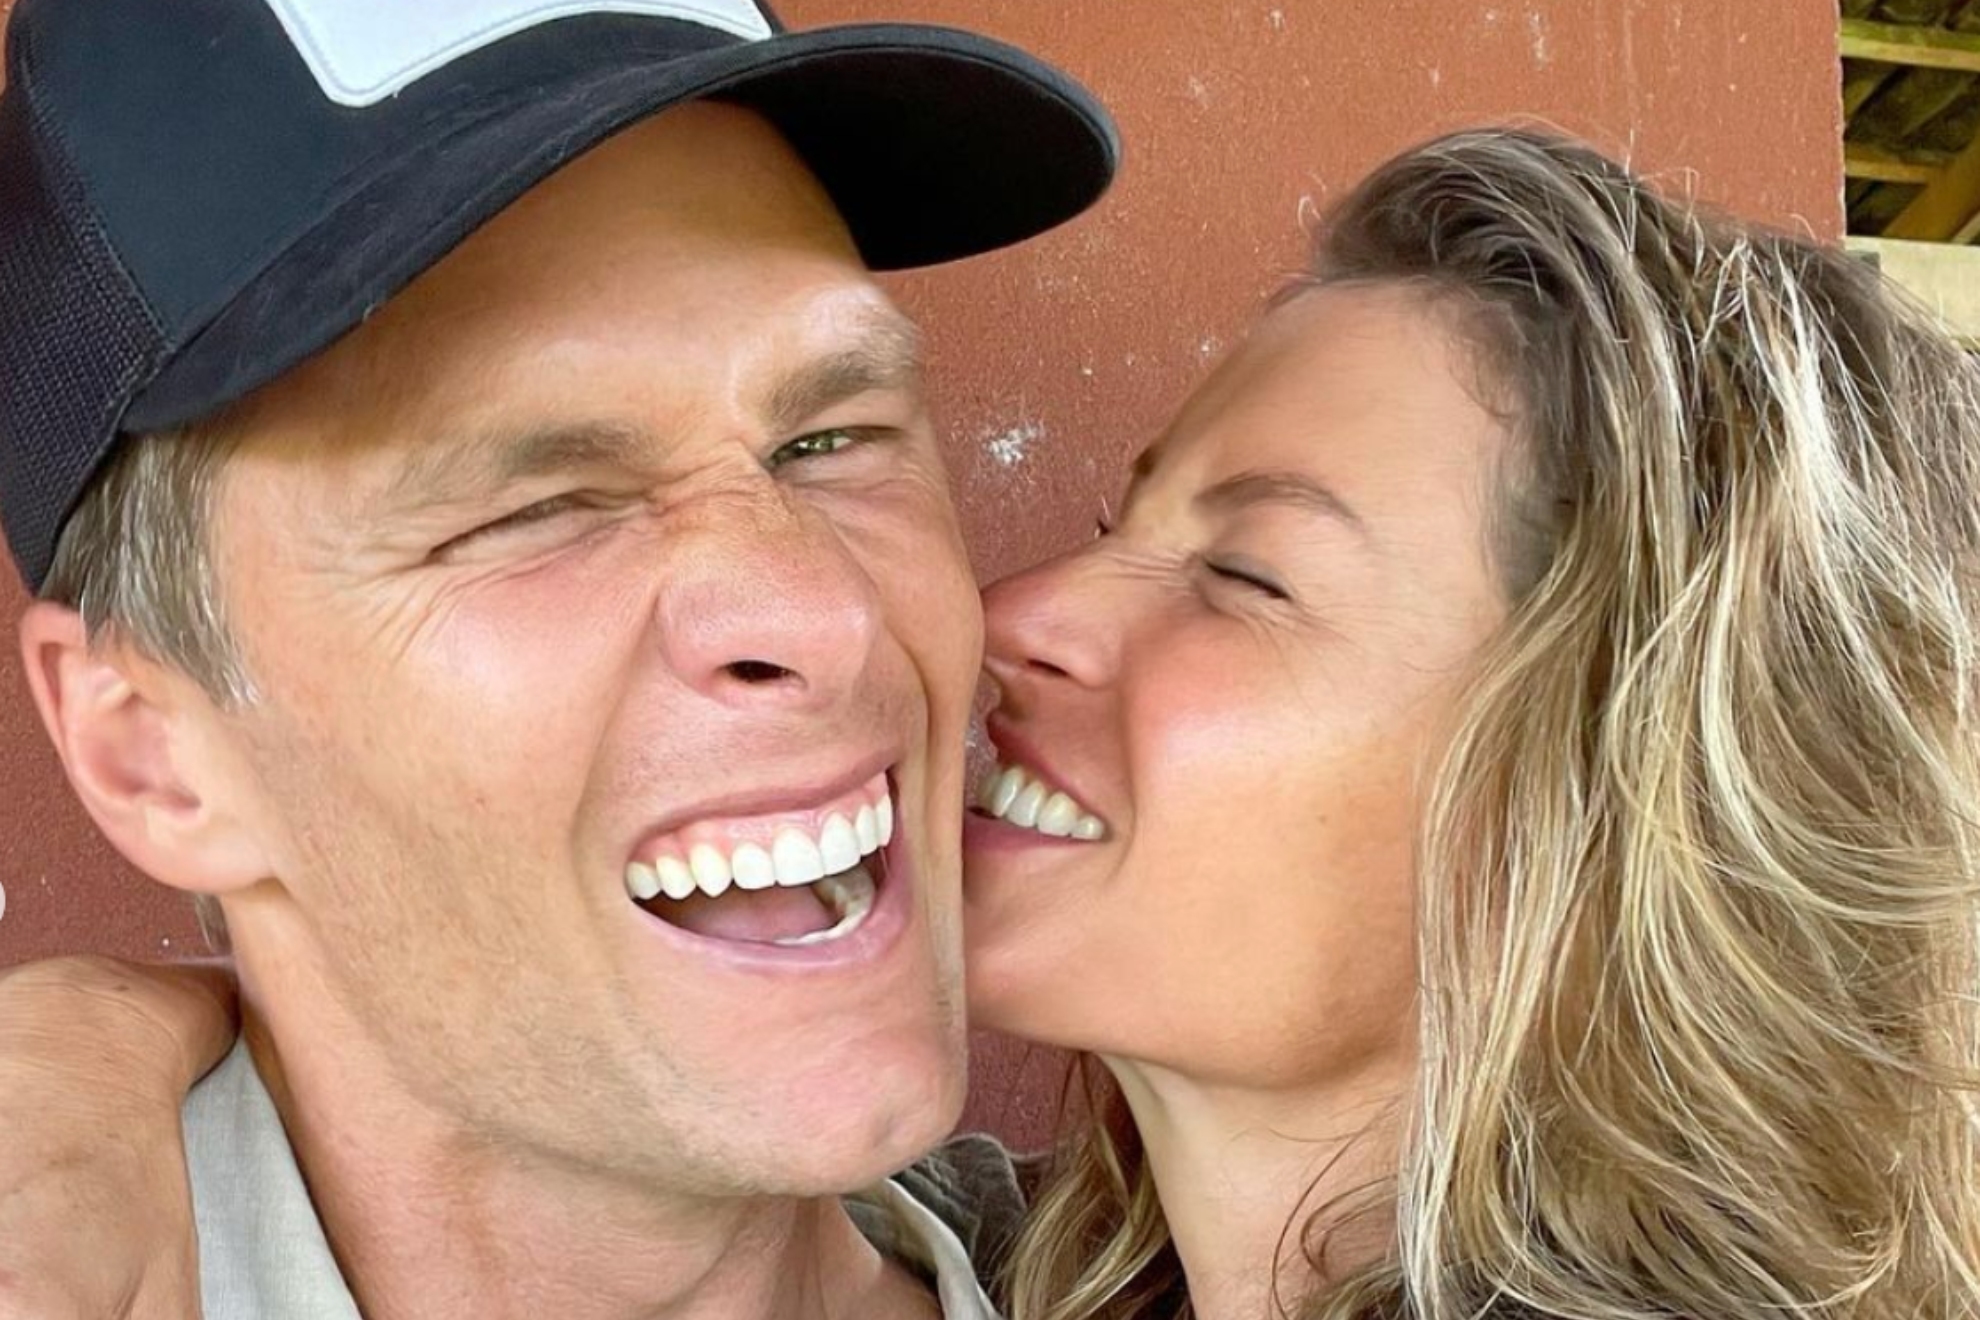 Instagram photo of Gisele Bündchen and Tom Brady when they were still married.